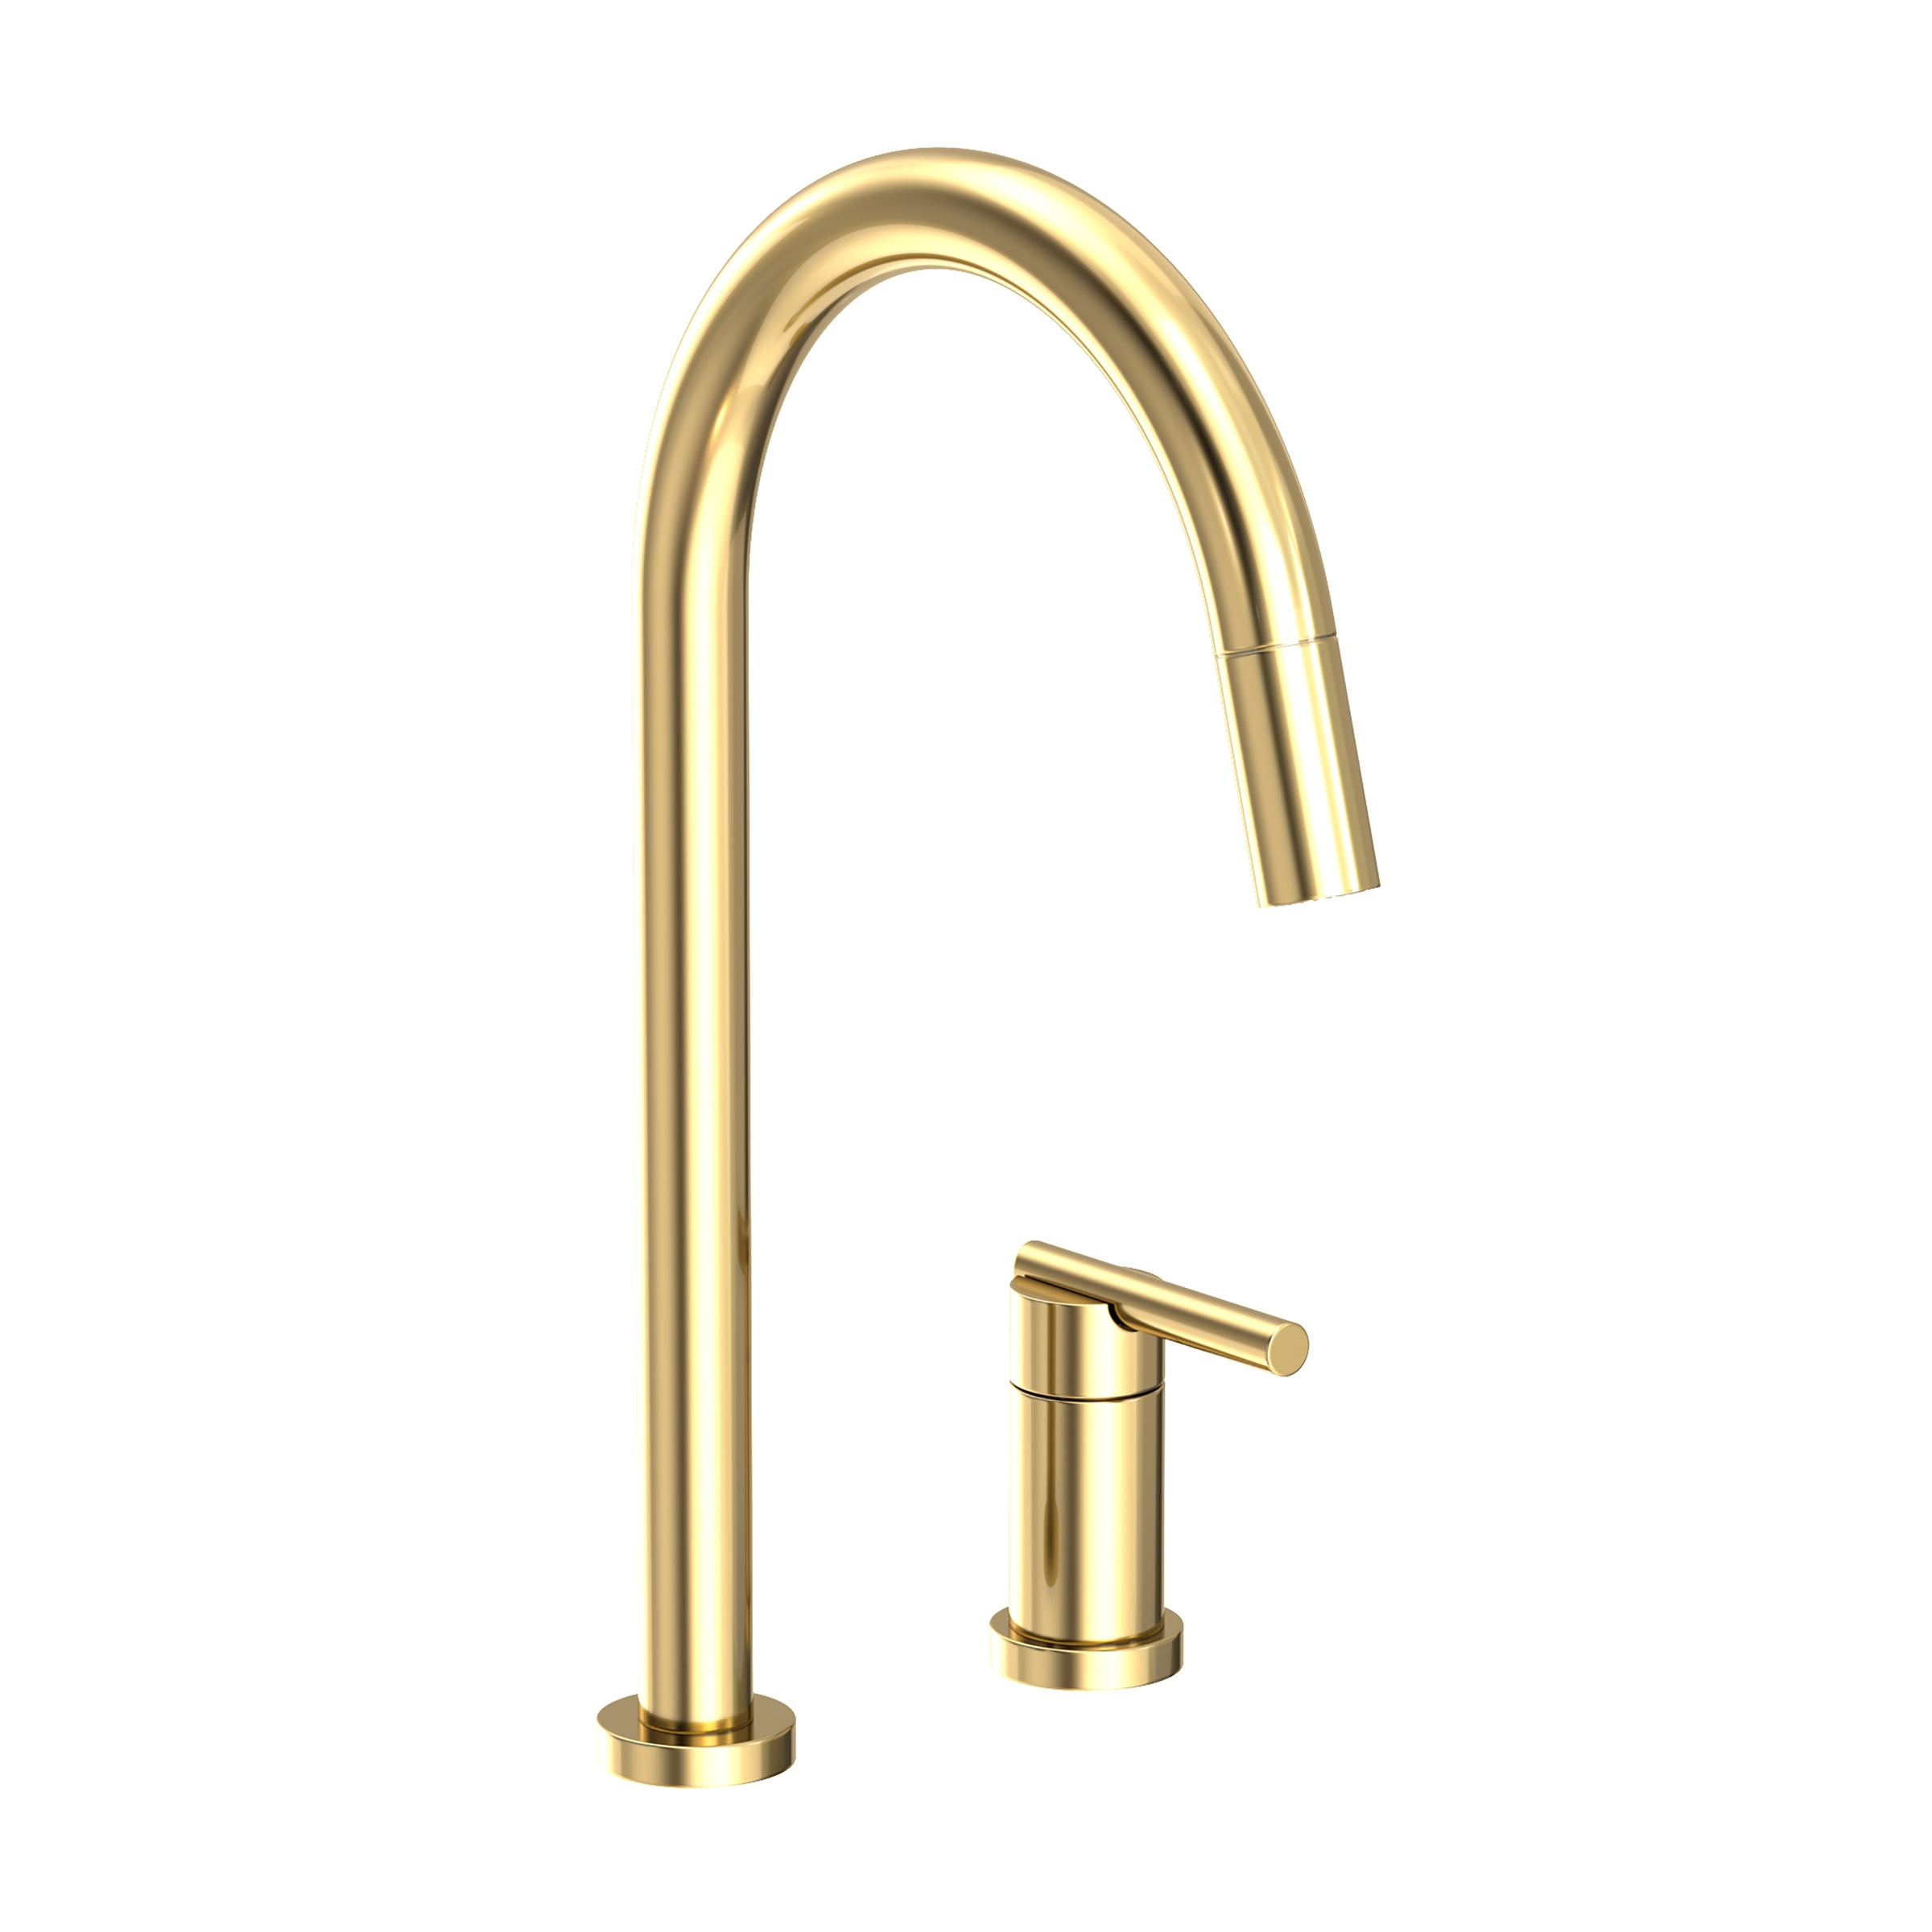 Newport Brass East Linear Pull Down Kitchen Faucet Forever Brass